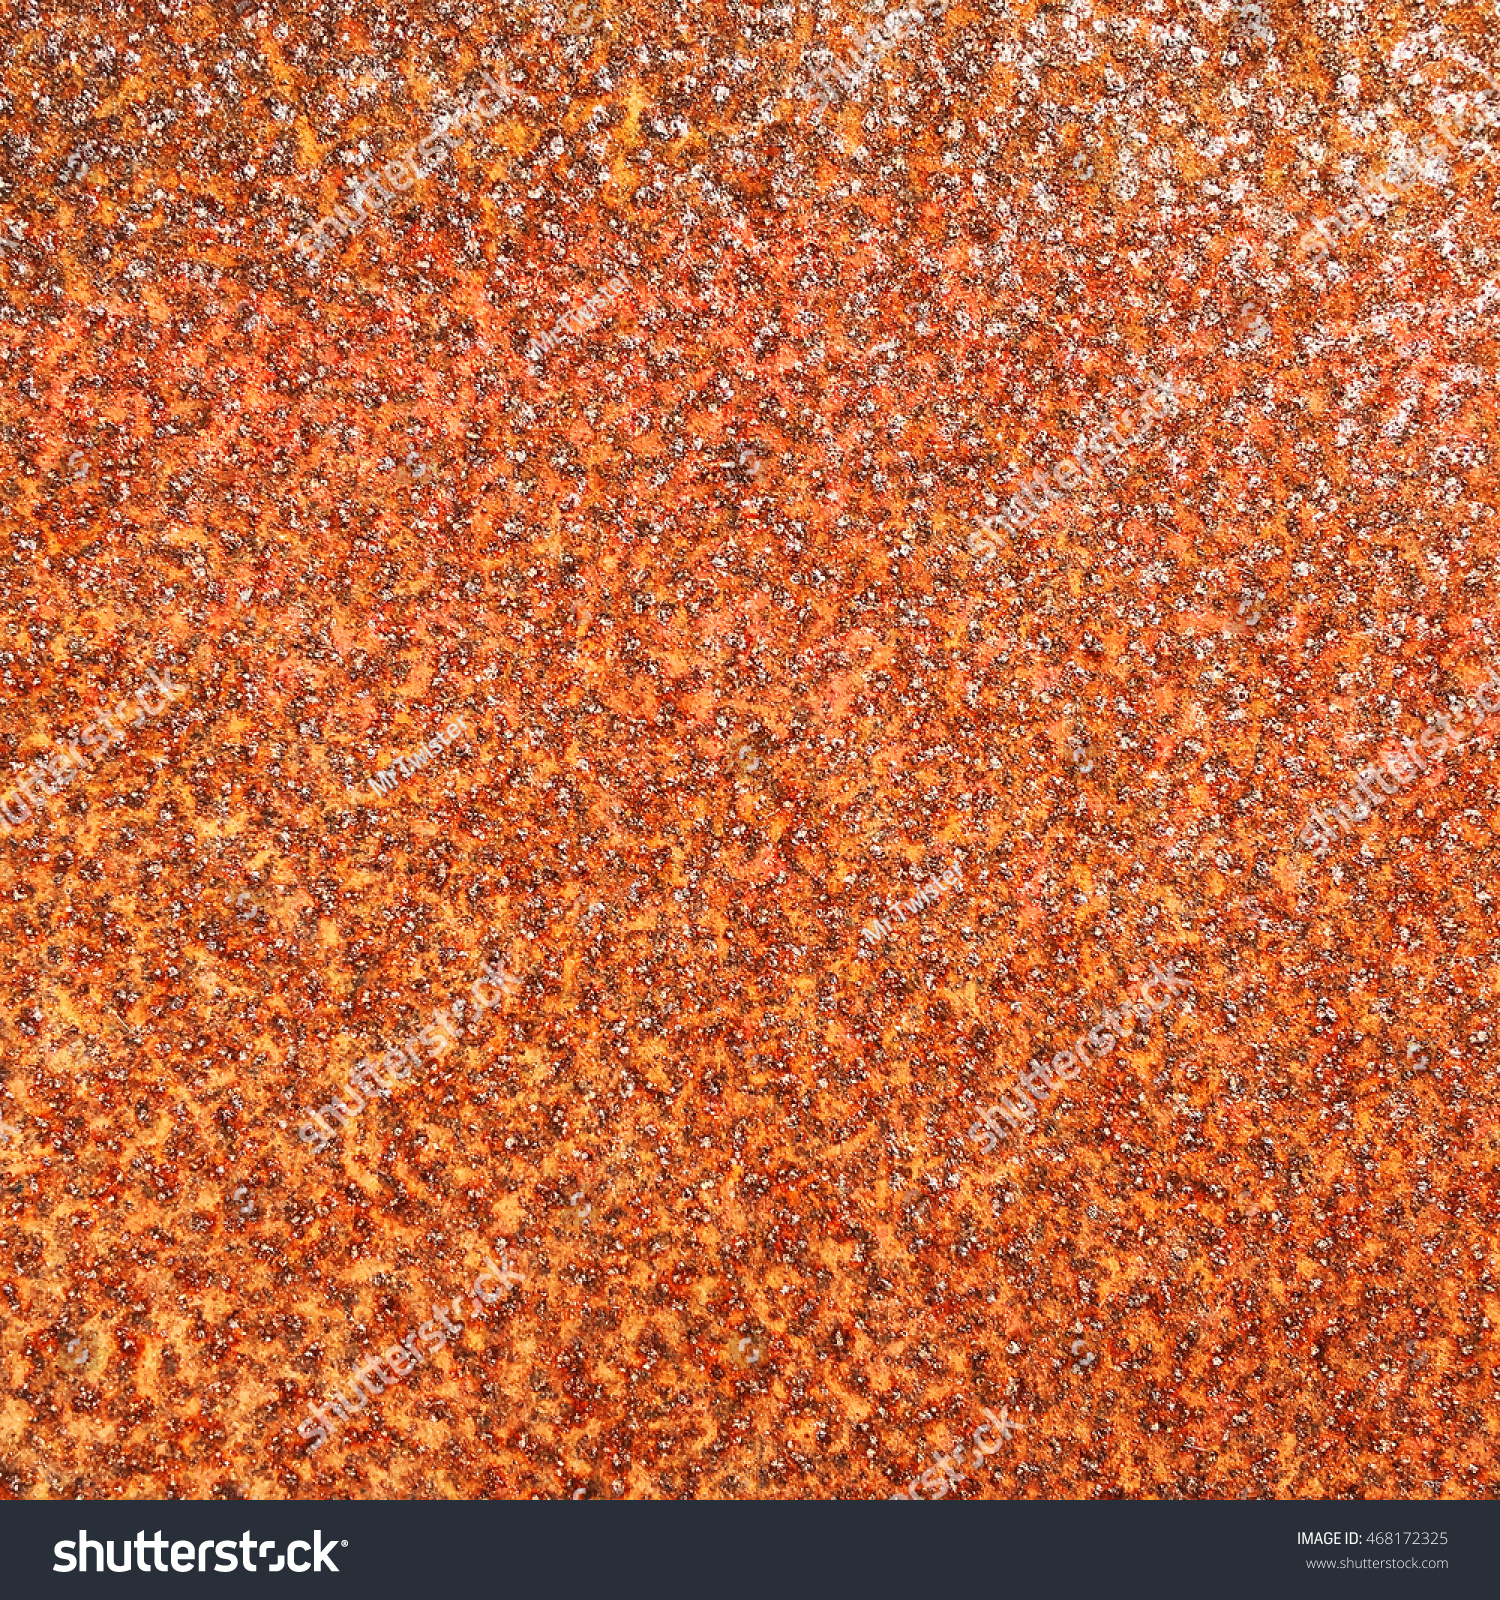 Corroded Rusty Metal Plate Surface Texture Stock Photo 468172325 ...